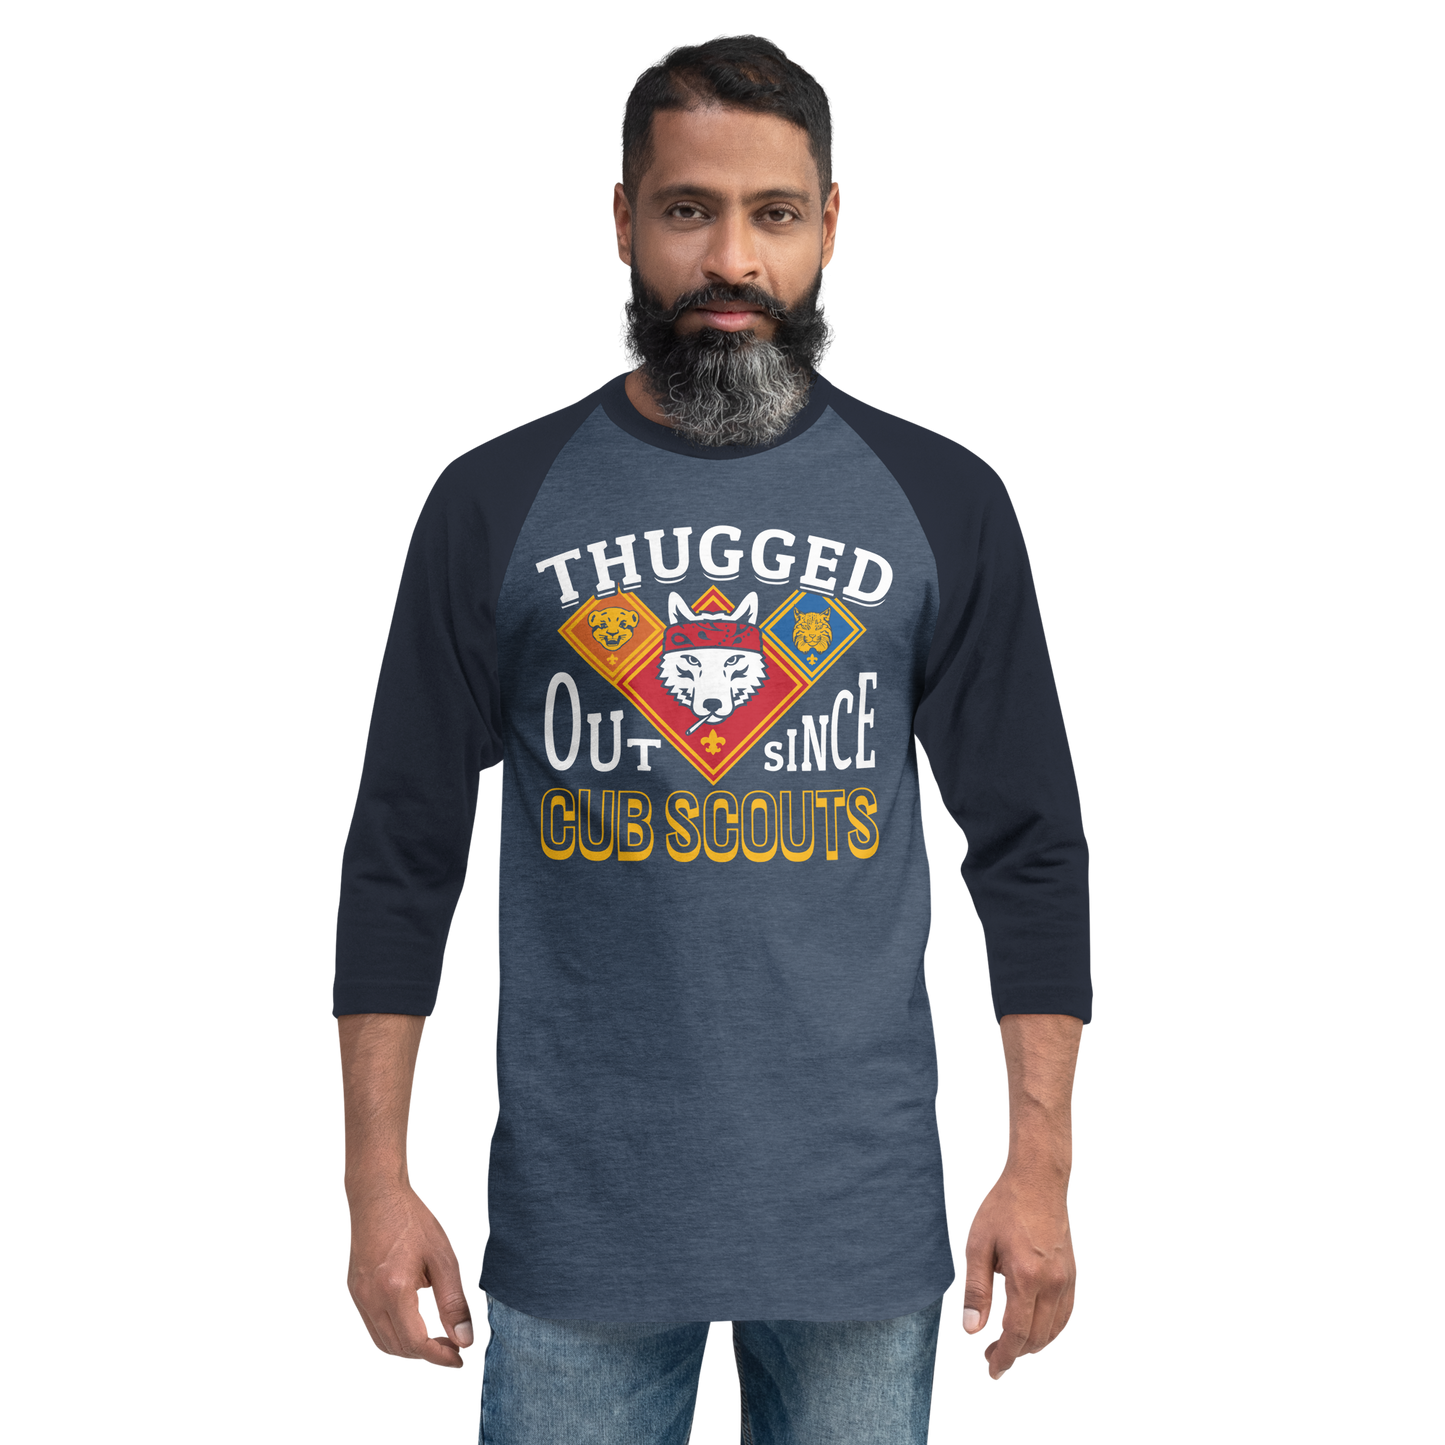 Thugged Out Since Cubscouts Jersey (Unisex)